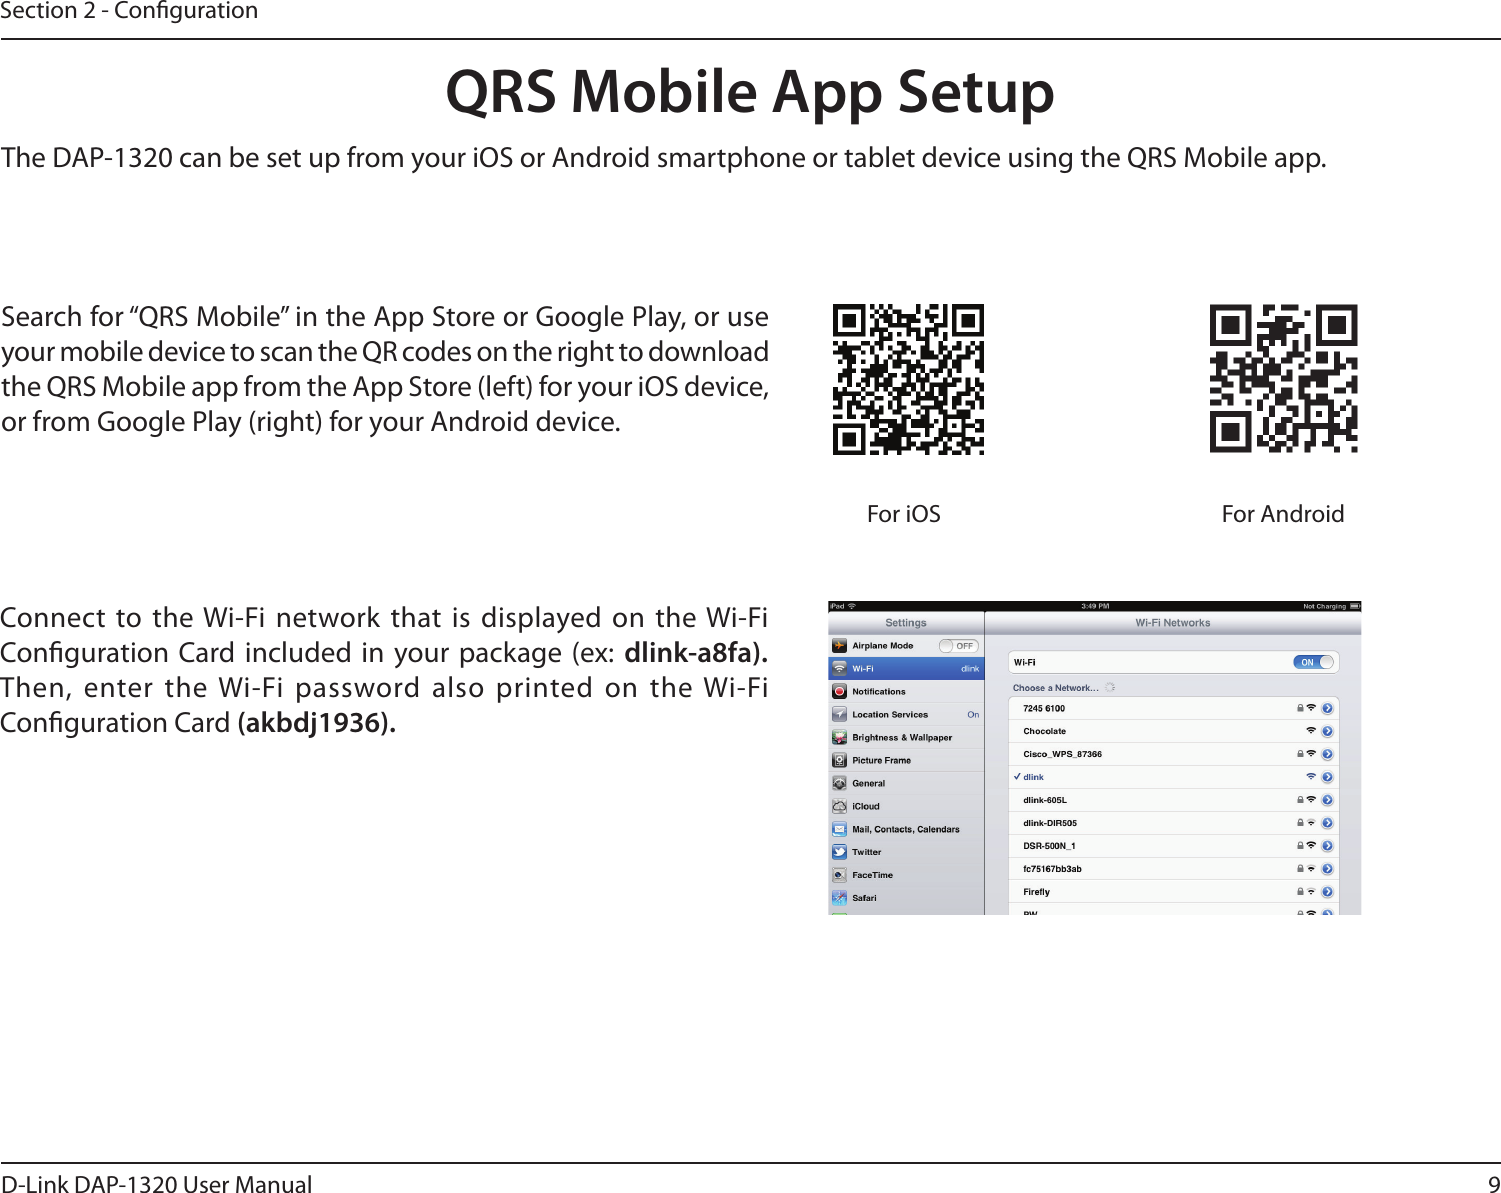 9D-Link DAP-1320 User ManualSection 2 - CongurationQRS Mobile App SetupSearch for “QRS Mobile” in the App Store or Google Play, or use your mobile device to scan the QR codes on the right to download the QRS Mobile app from the App Store (left) for your iOS device, or from Google Play (right) for your Android device.For iOS For AndroidConnect to the Wi-Fi network that is displayed on  the Wi-Fi Conguration  Card included in  your package (ex:  dlink-a8fa). Then, enter the Wi-Fi password also printed on  the Wi-Fi Conguration Card (akbdj1936). The DAP-1320 can be set up from your iOS or Android smartphone or tablet device using the QRS Mobile app.